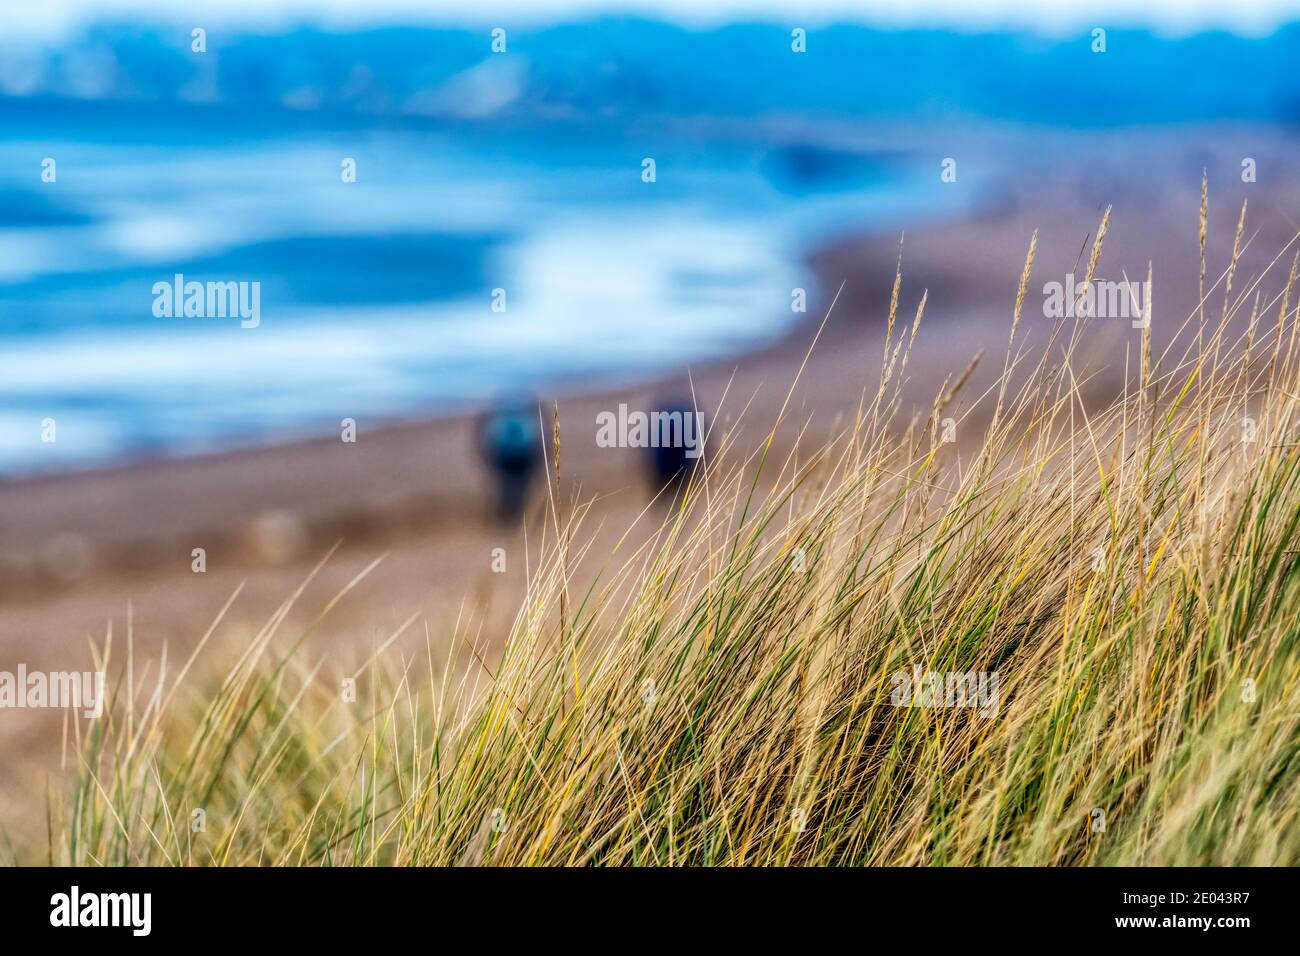 Out of focus people on beach seen behind grass on dunes. Stock Photo